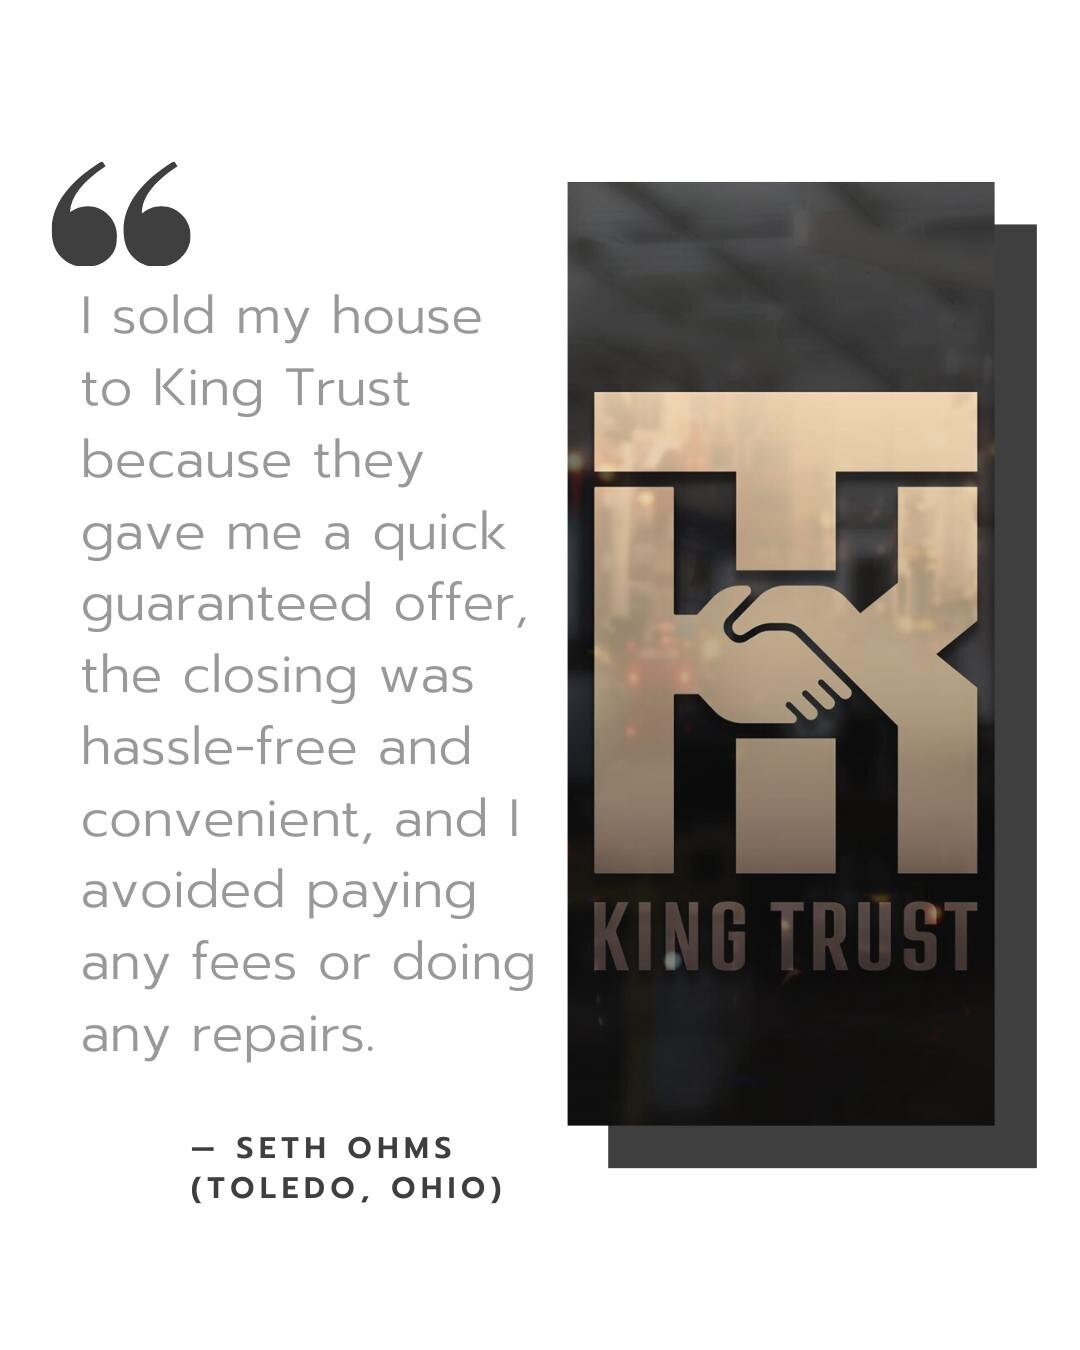 Some of our most successful clients say this about us.
If you are looking to buy or lease a new home or commercial property, it's critical that you read this review first.

Call us now (404) 777-2161
visit our website https://kingtrust.com/
.
.
.
.
#